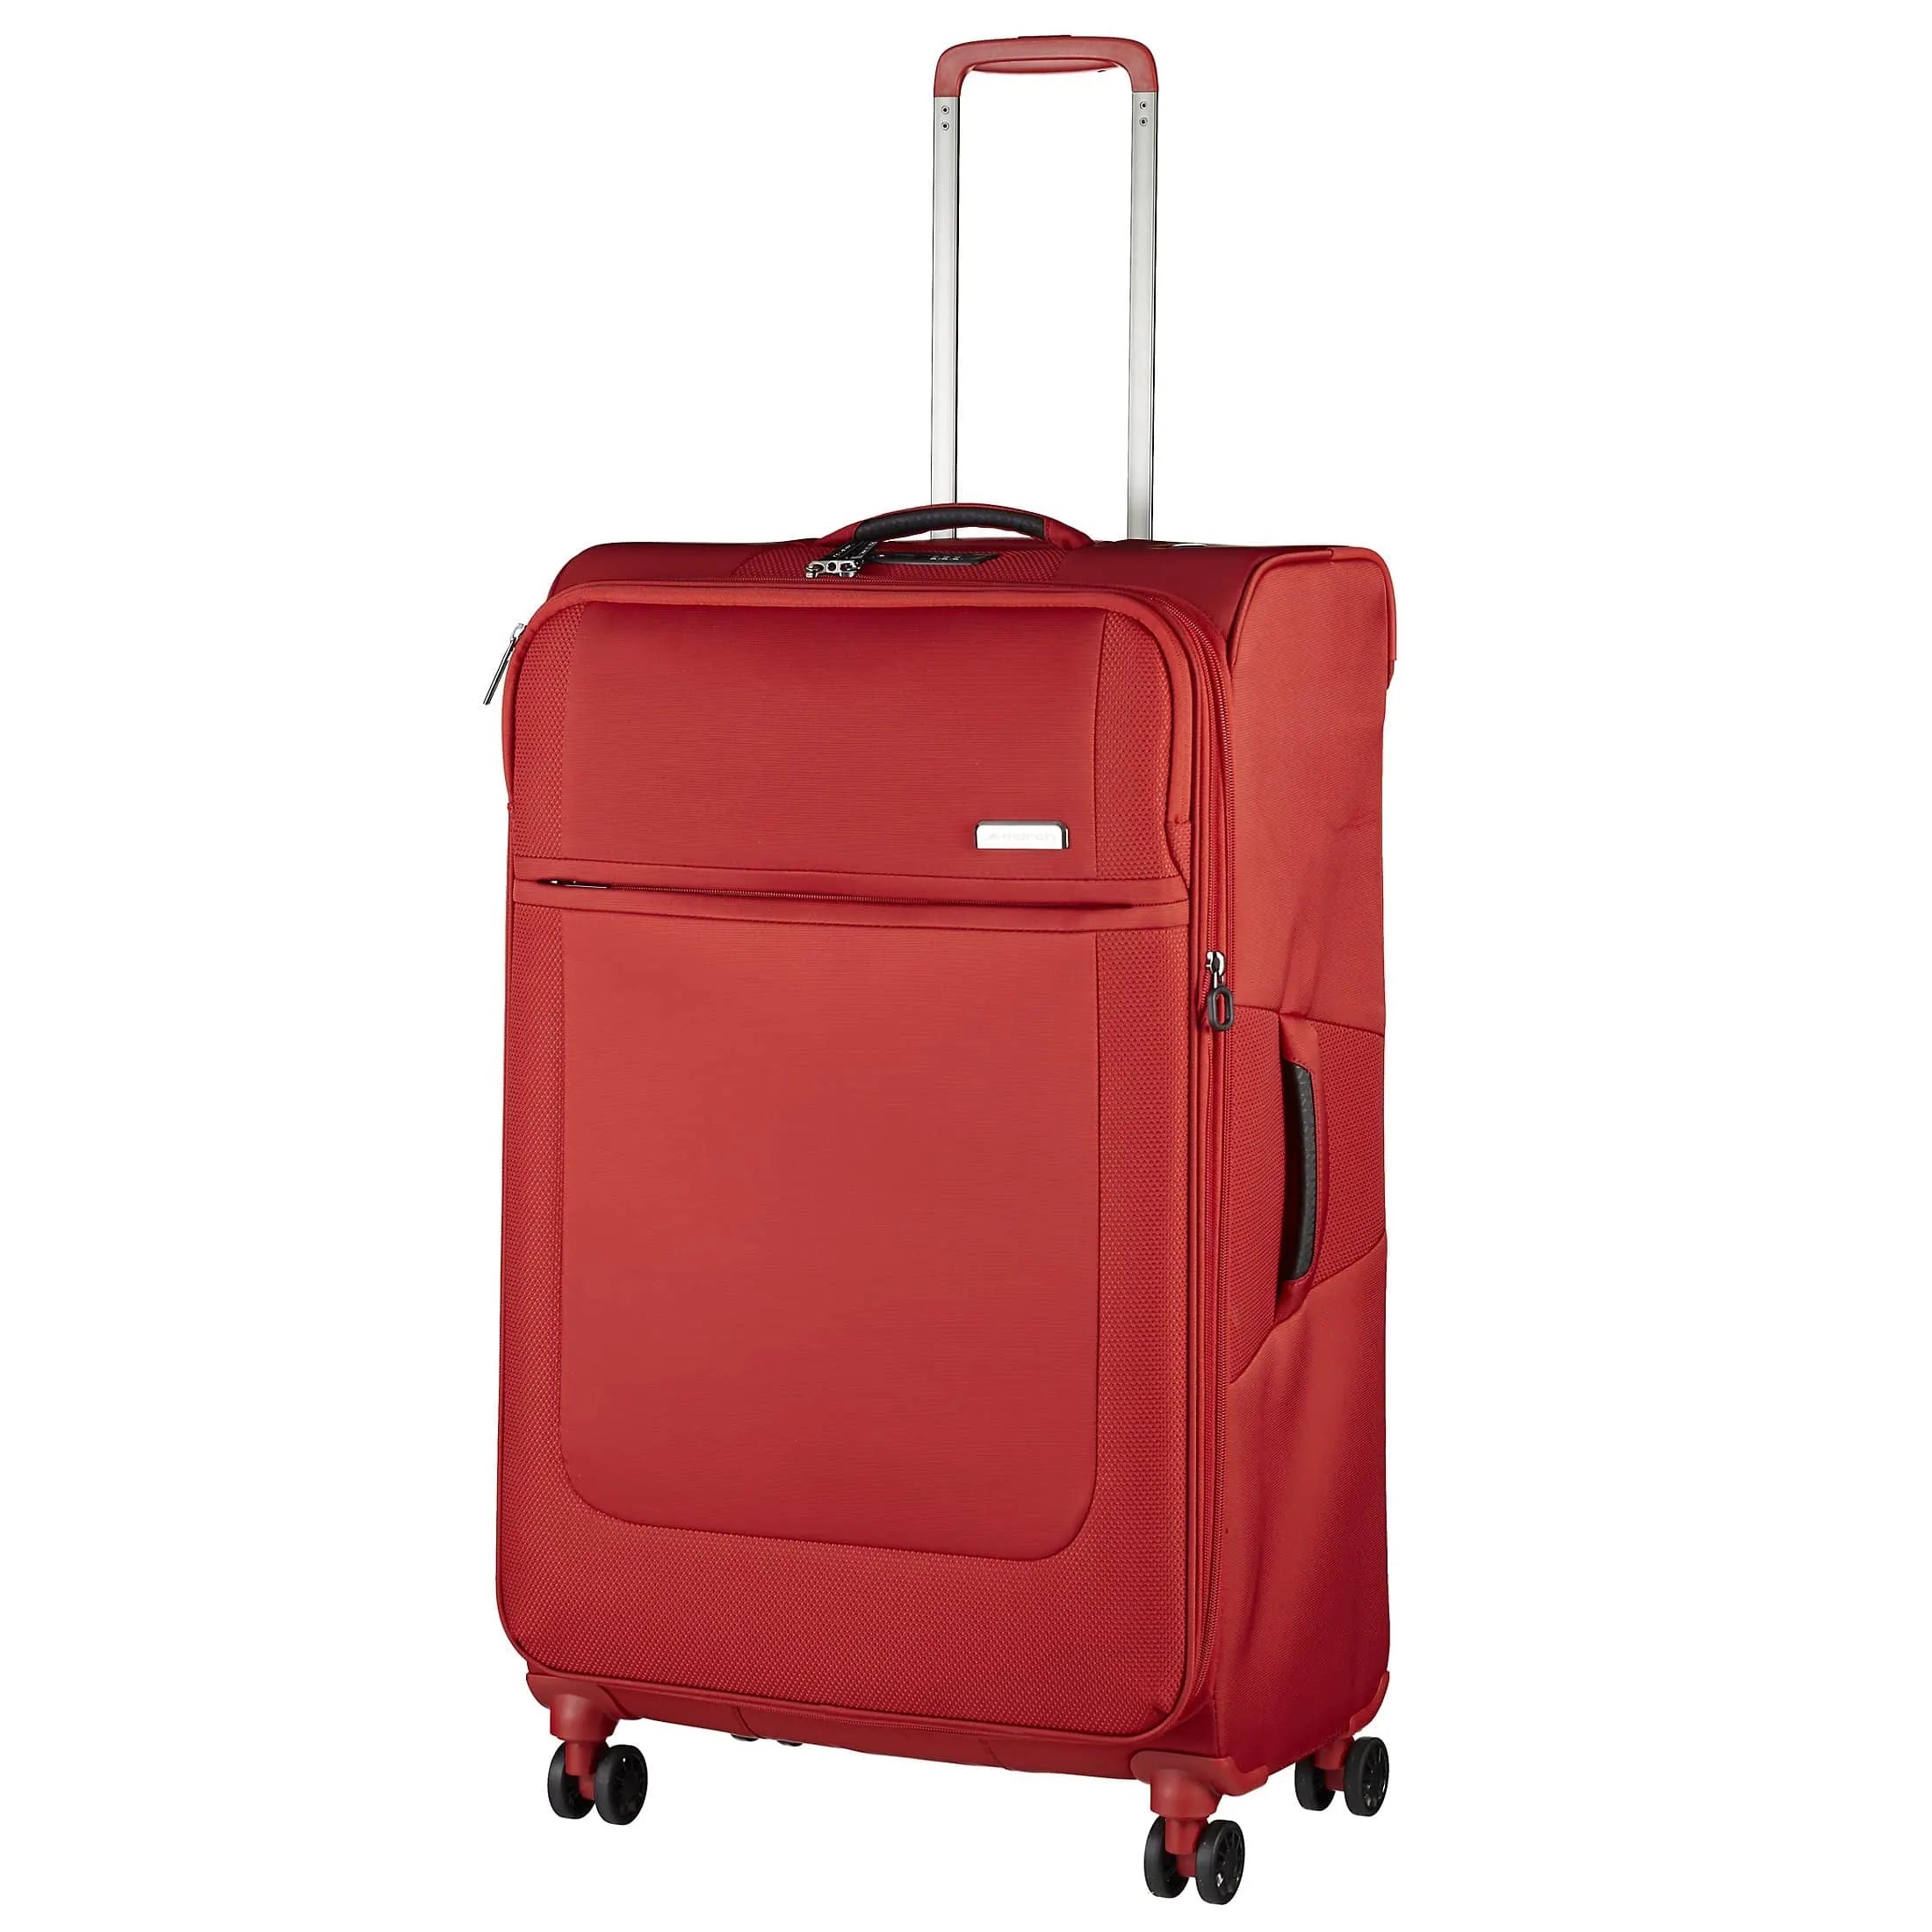 March 15 Trading Imperial 4-wheel trolley 78 cm - red